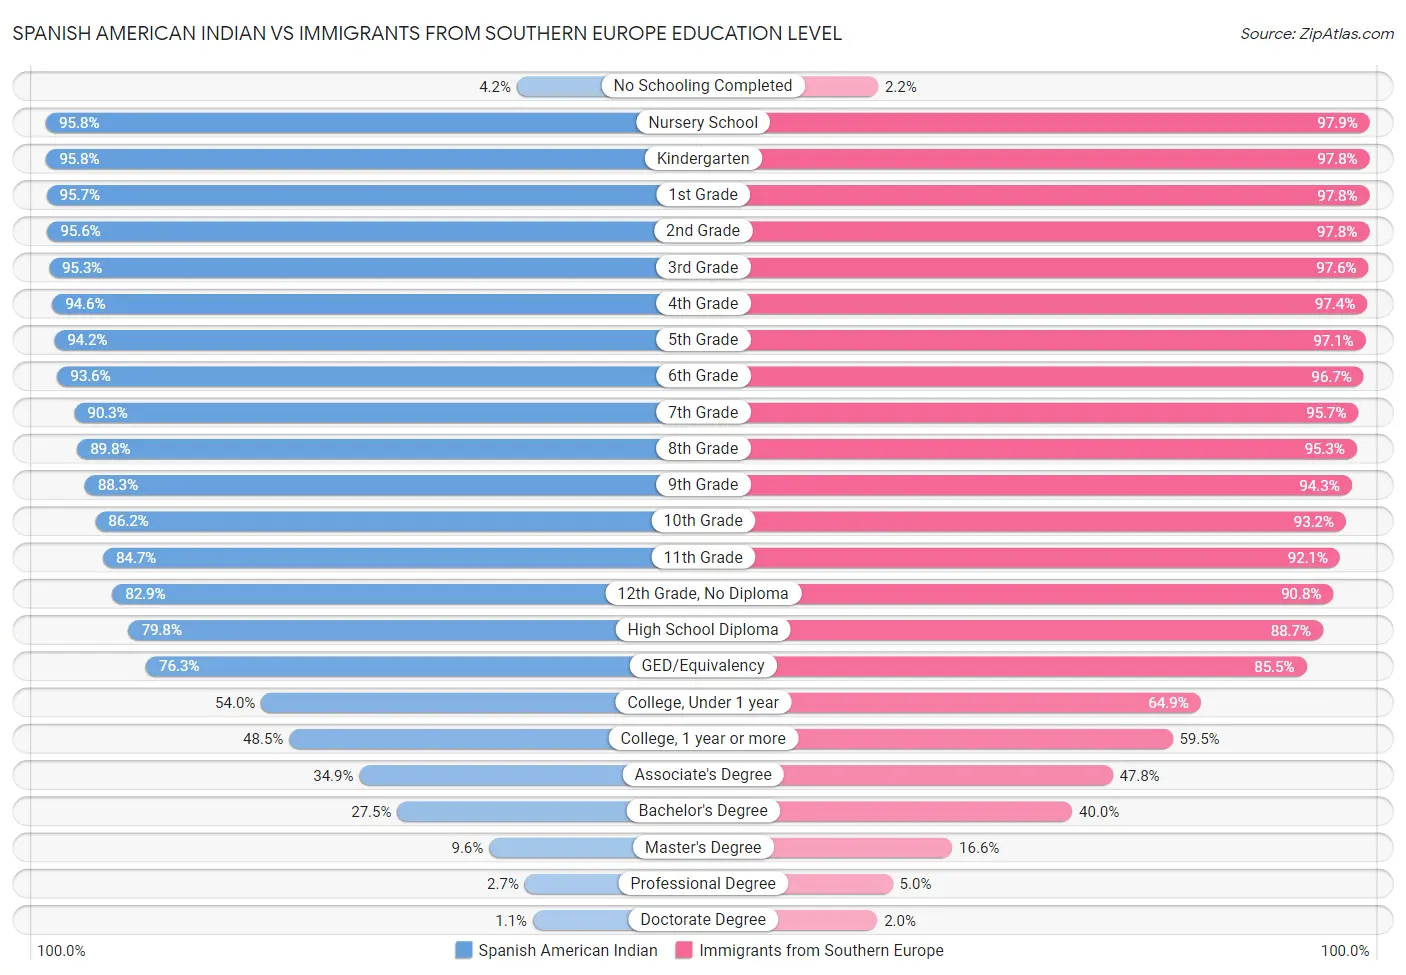 Spanish American Indian vs Immigrants from Southern Europe Education Level